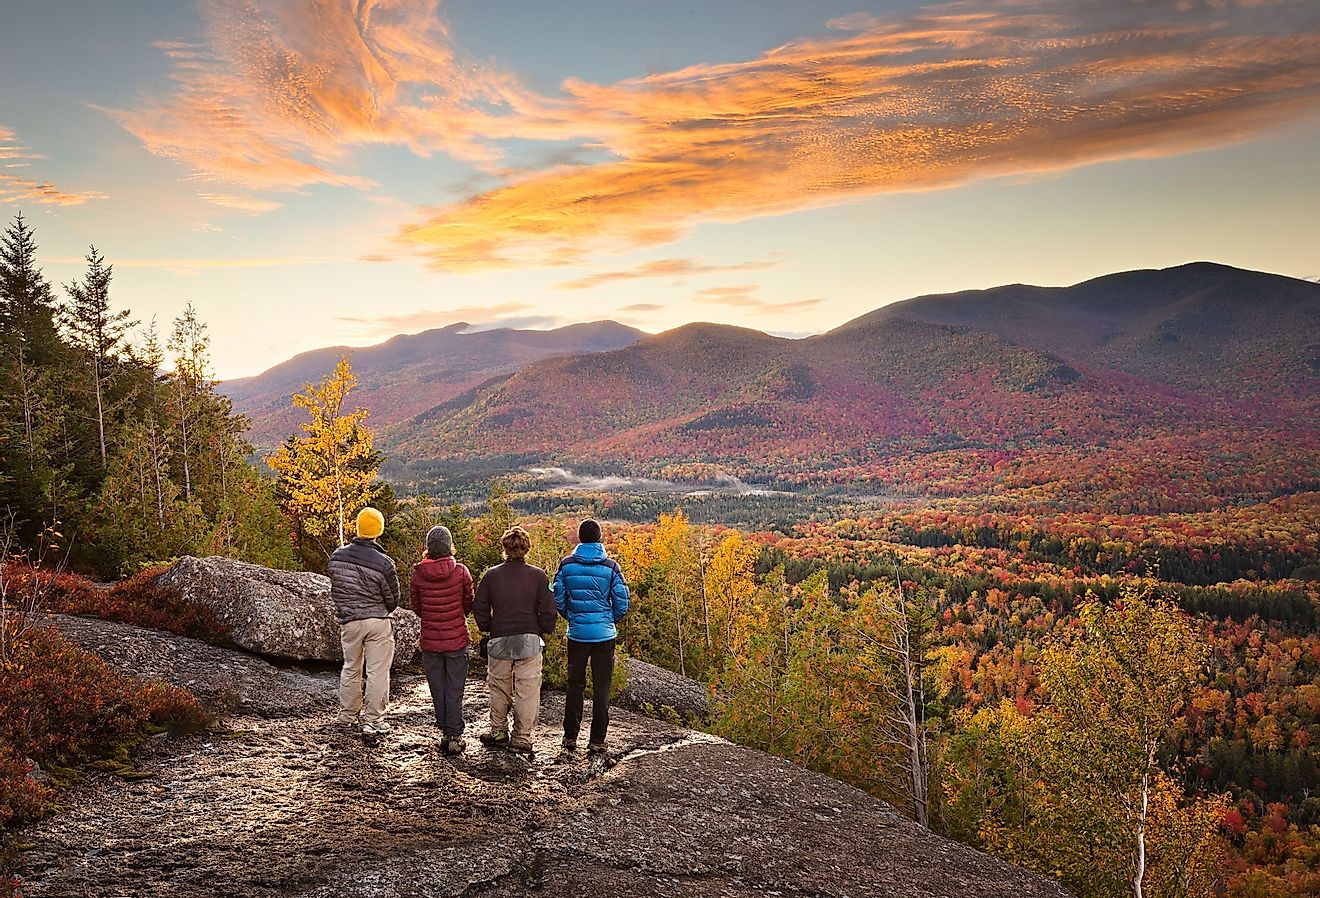 Group of hikers enjoying the view of the Adirondacks in autumn.